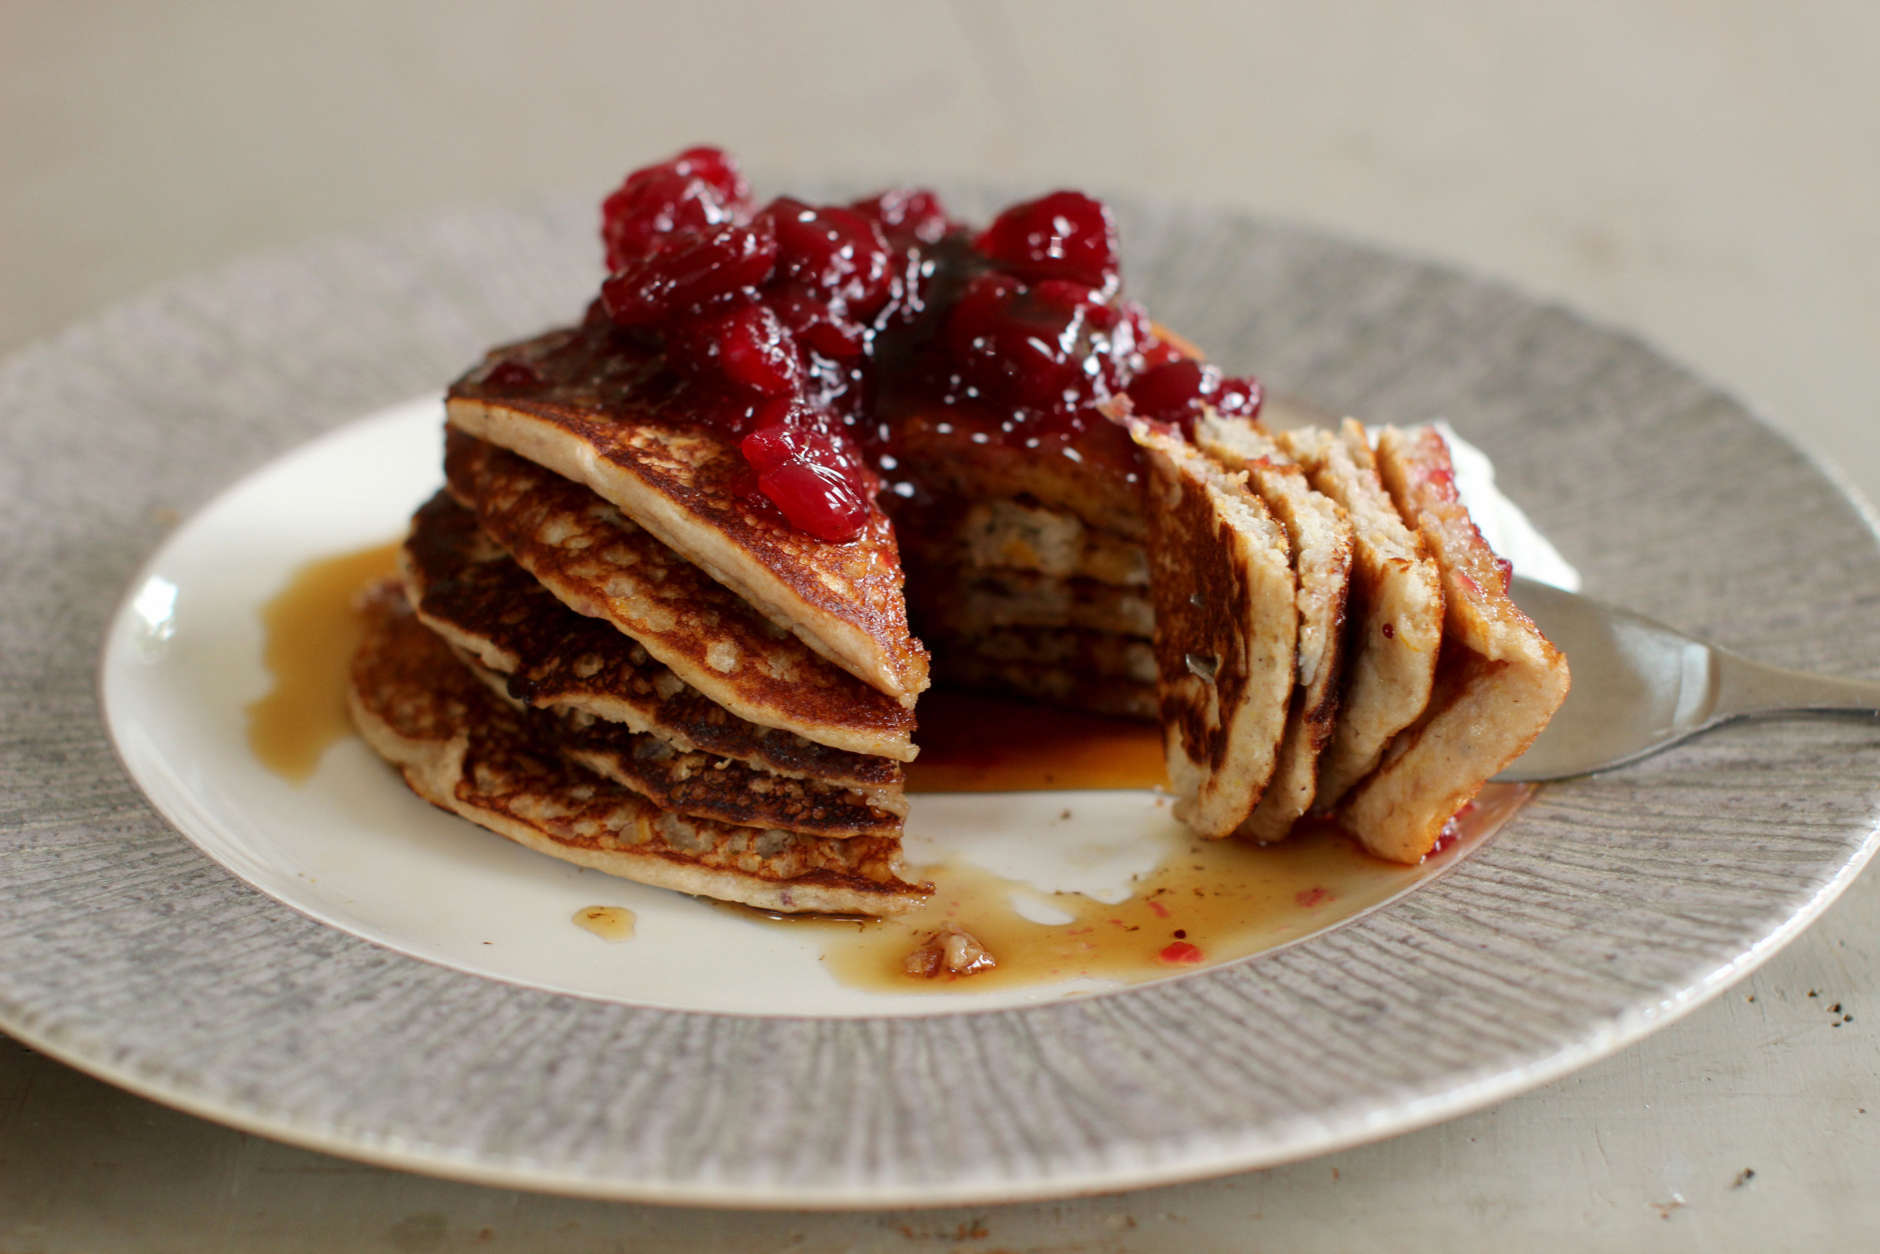 This Oct. 5, 2015 photo shows cranberry sauce, oat and flax pancakes in Concord, N.H. Making your own cranberry sauce this holiday is incredibly easy and it allows you to cut the sugar content in half without anyone missing it.  (AP Photo/Matthew Mead)